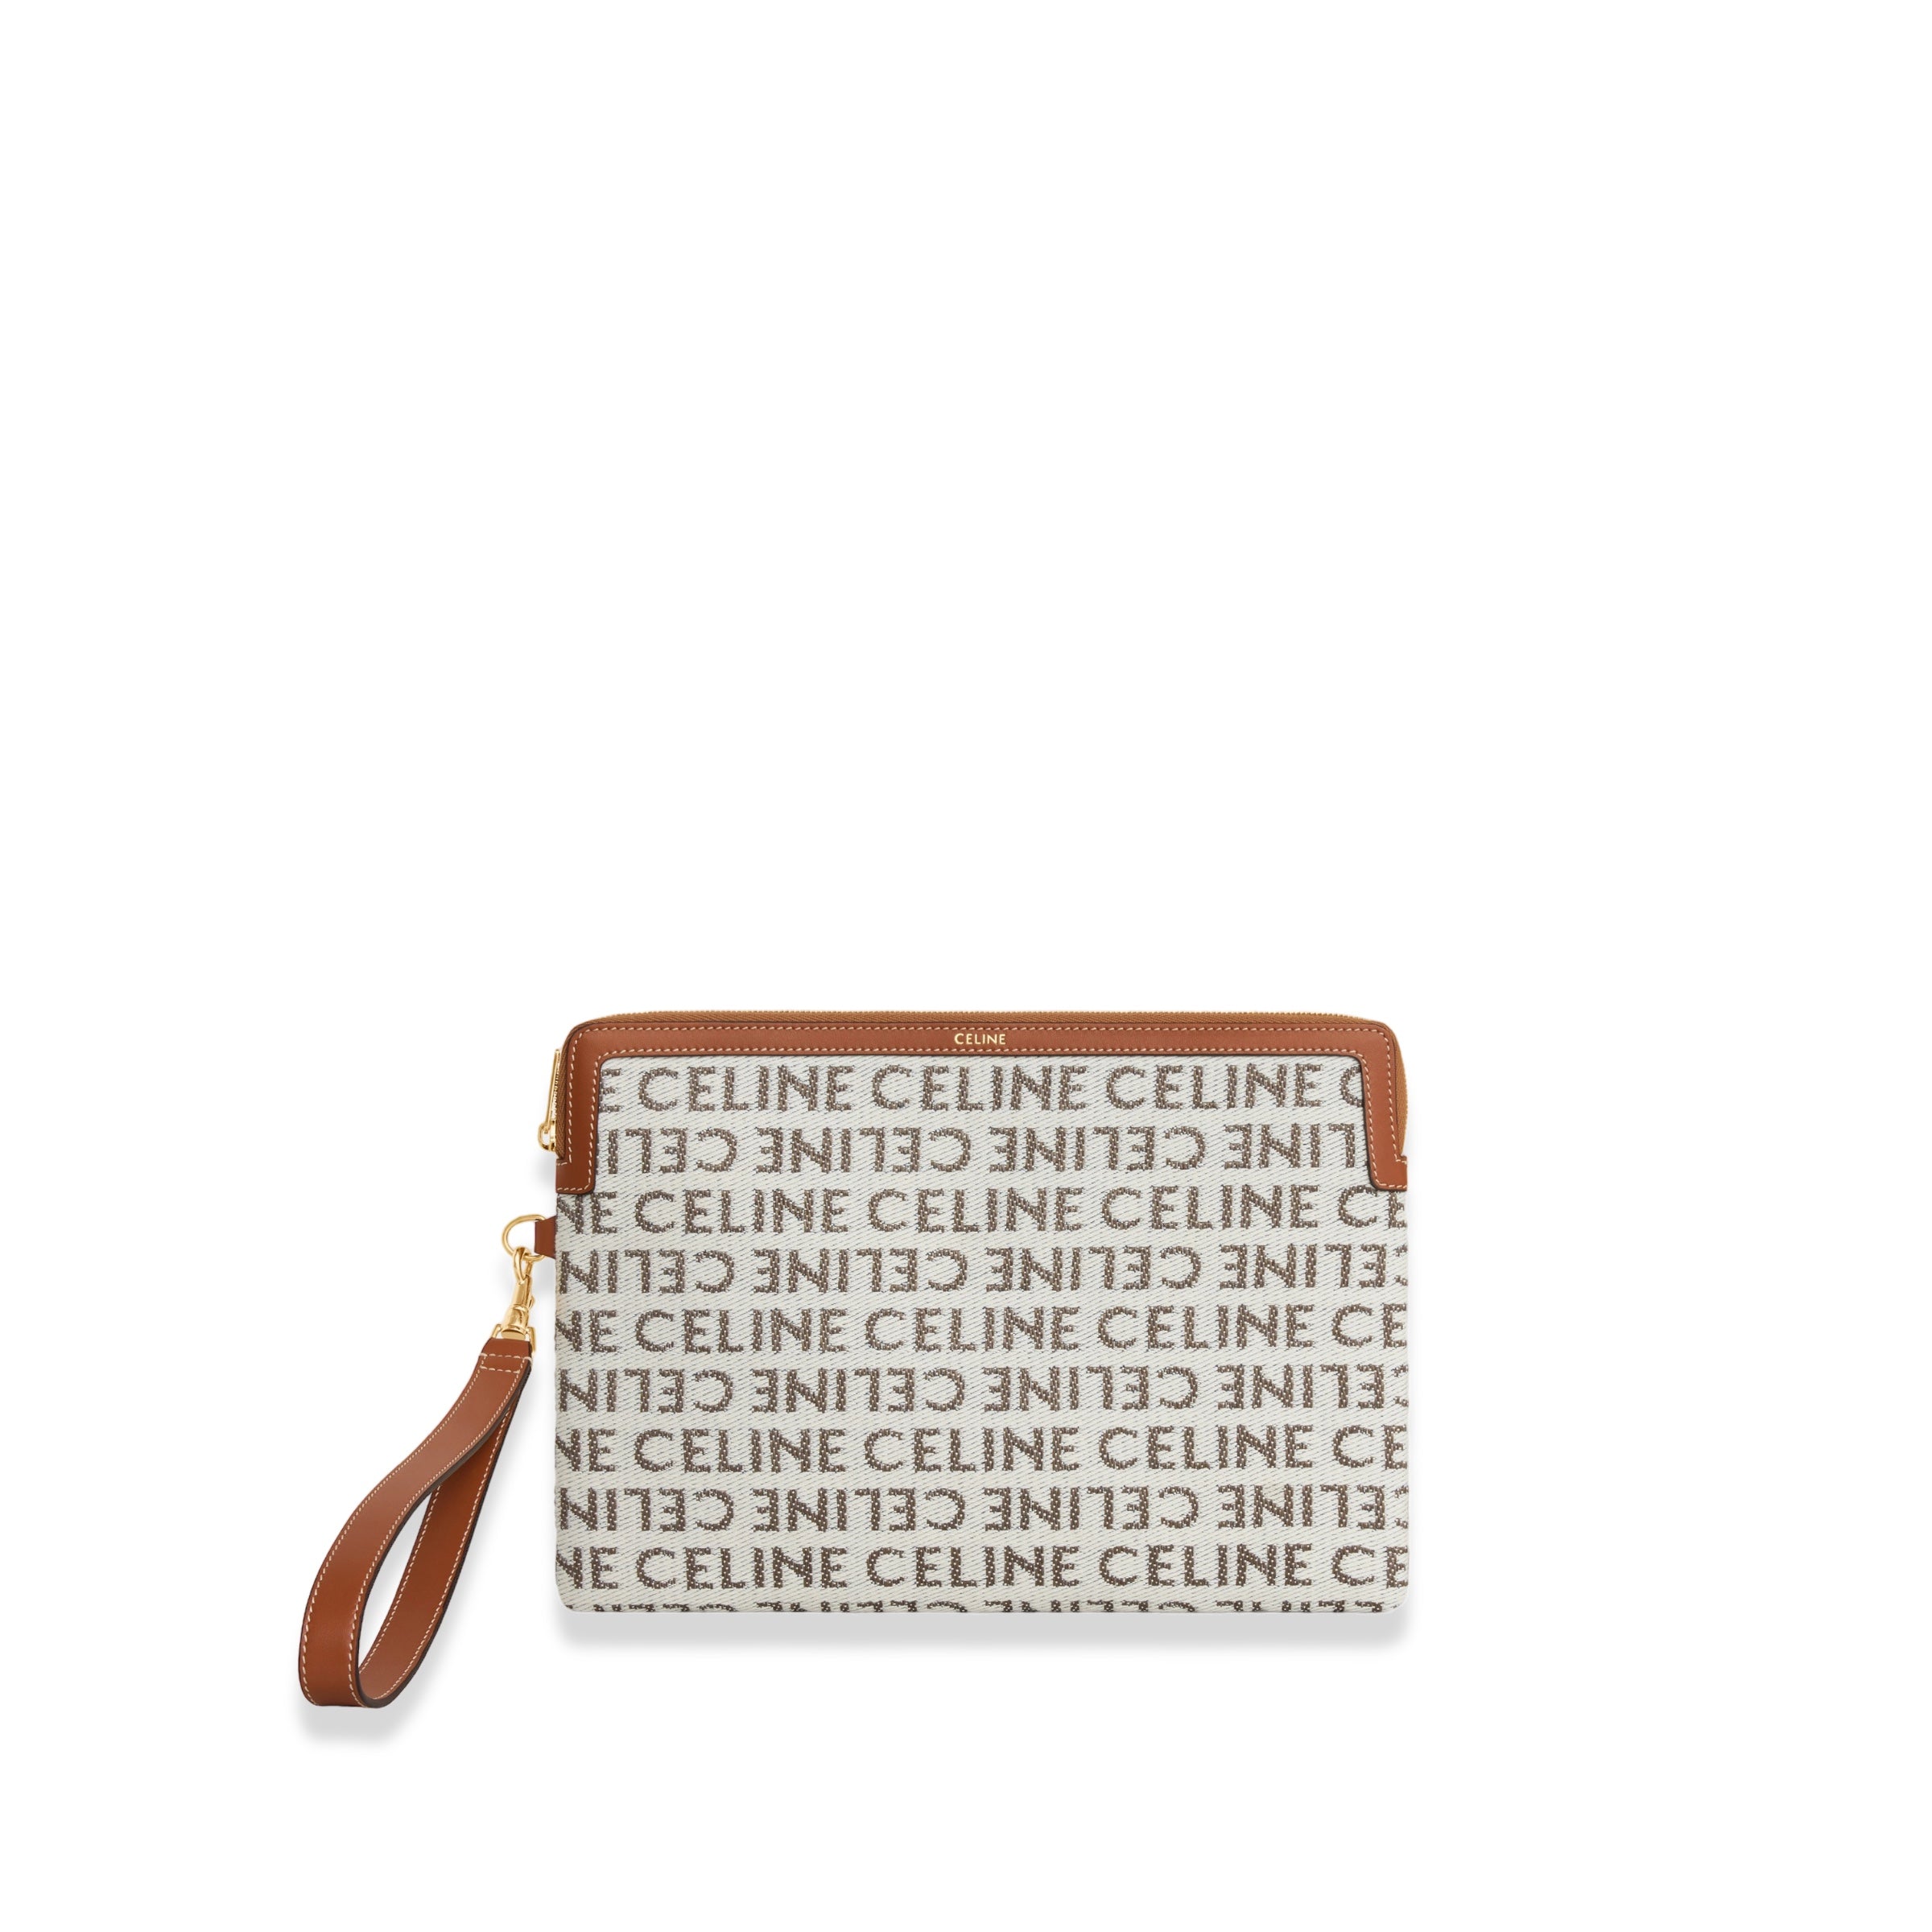 Celine - Small Signature logo Pouch With Strap